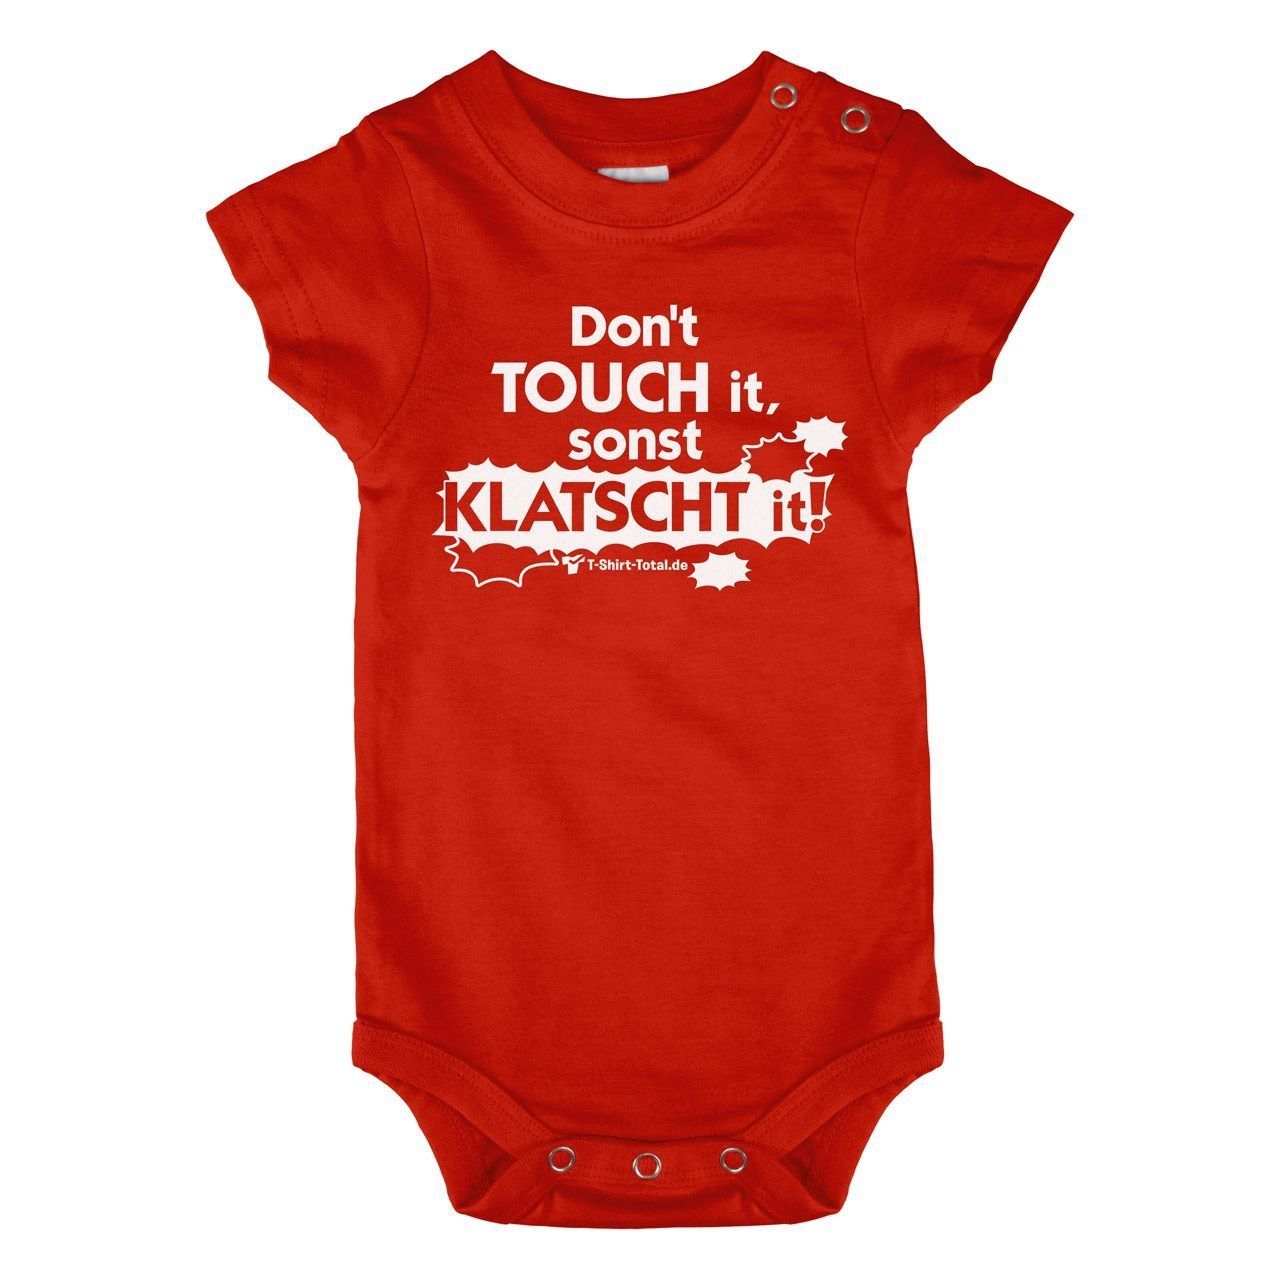 Dont touch it Baby Body Kurzarm rot 56 / 62